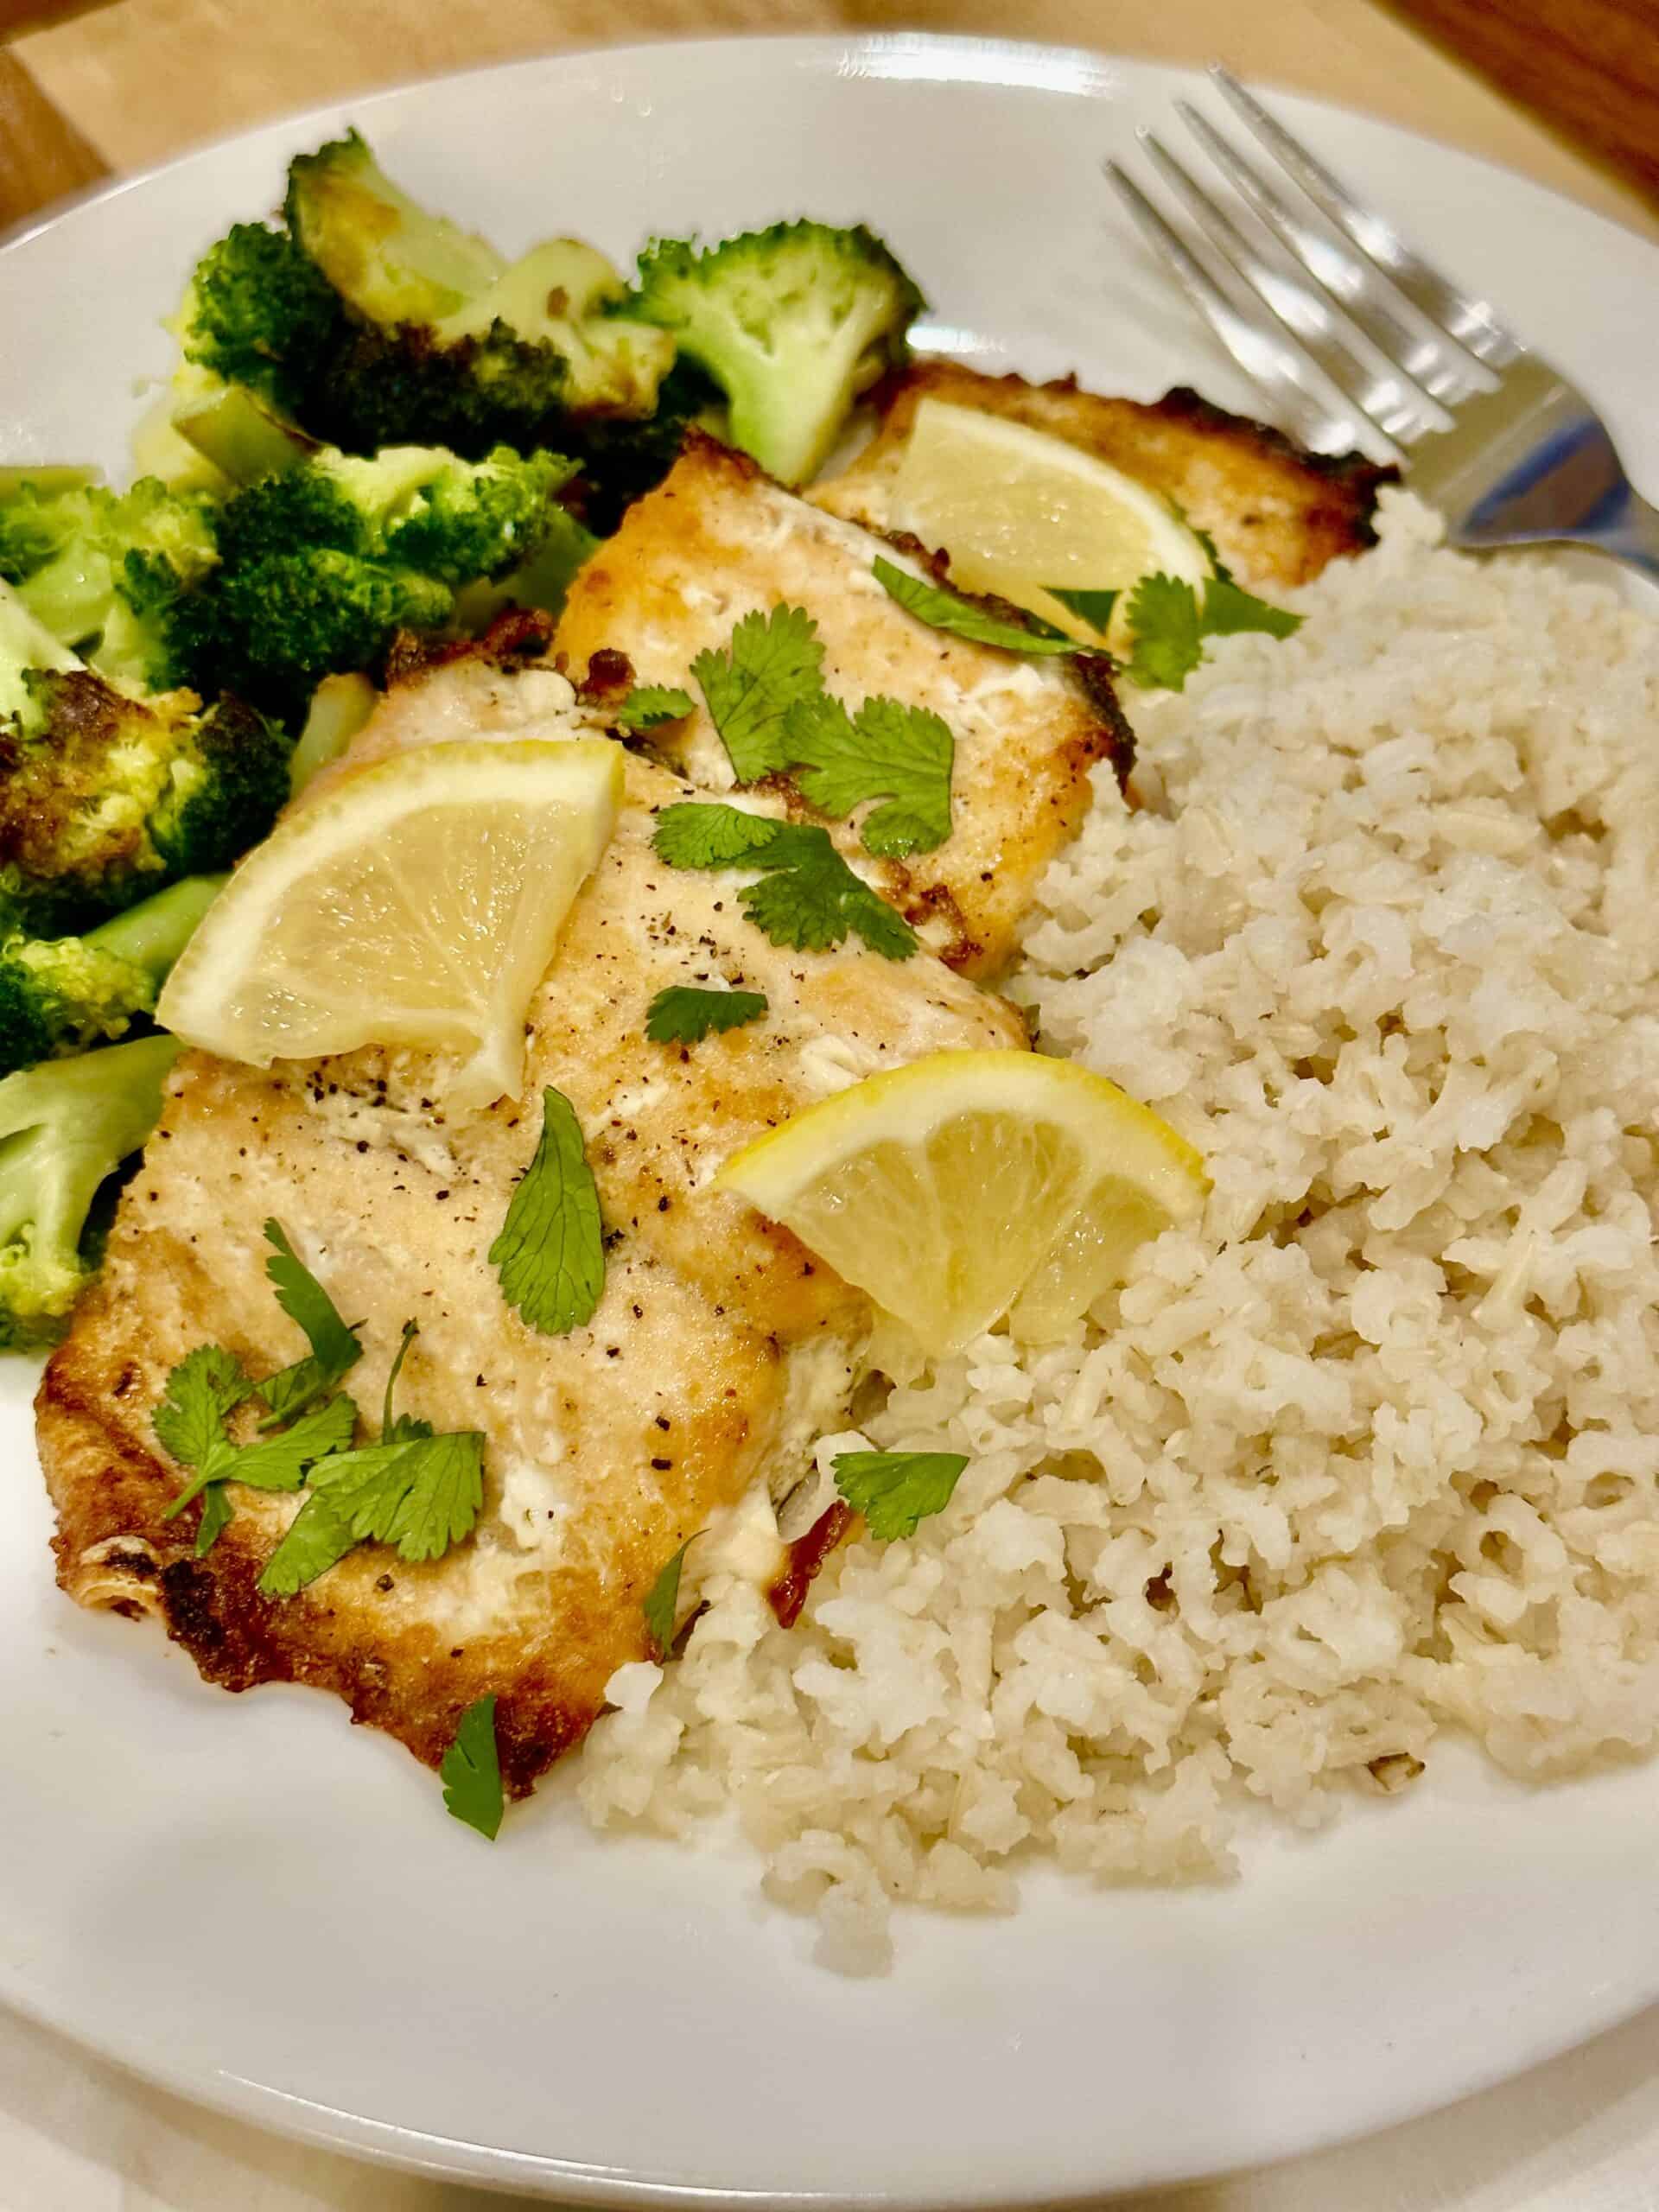 baked frozen salmon served with rice and broccoli on a plate.